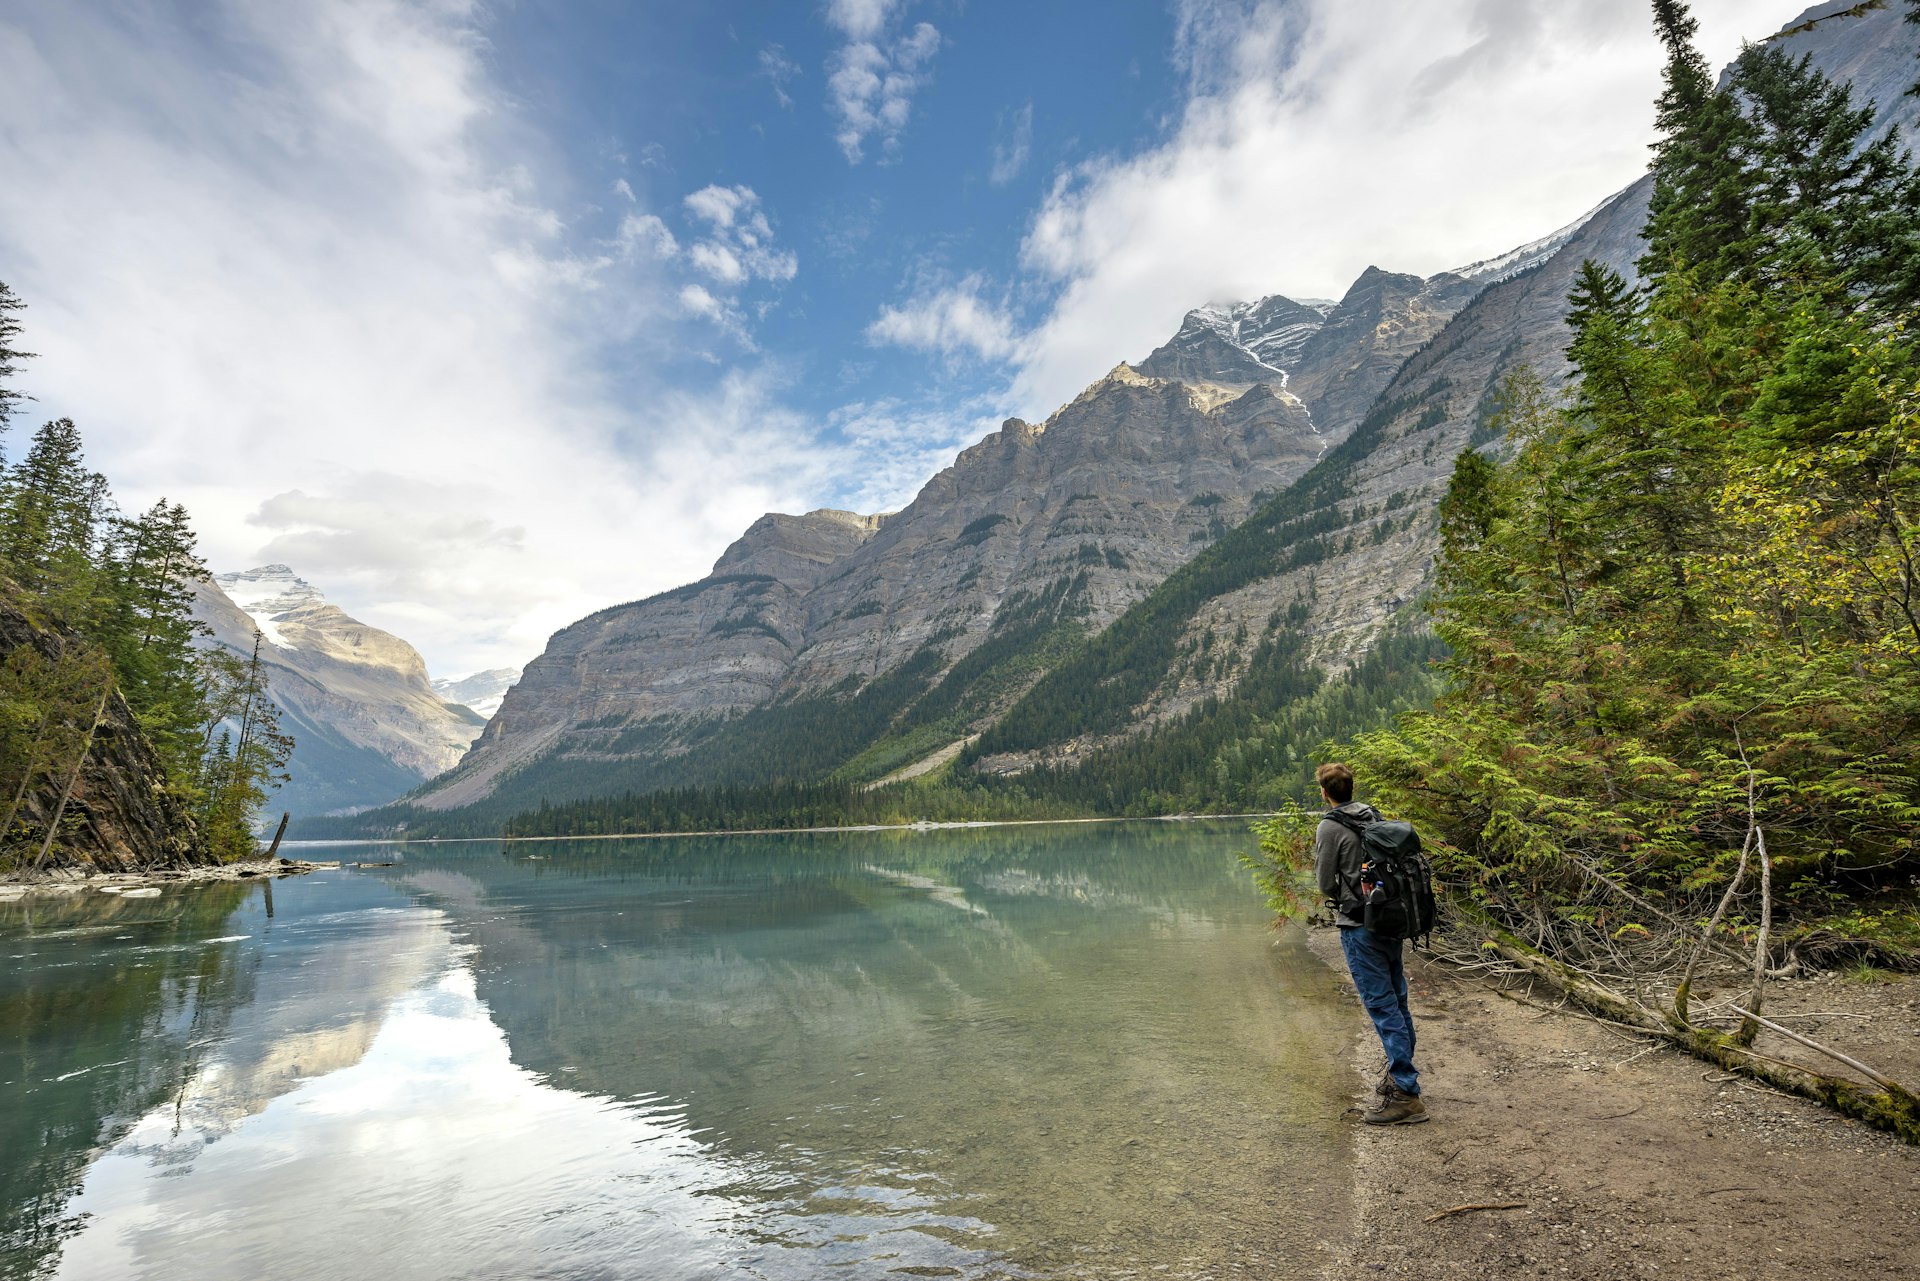 Hikers on the shore of Kinney Lake, Mount Robson Provincial Park, British Columbia, Canada